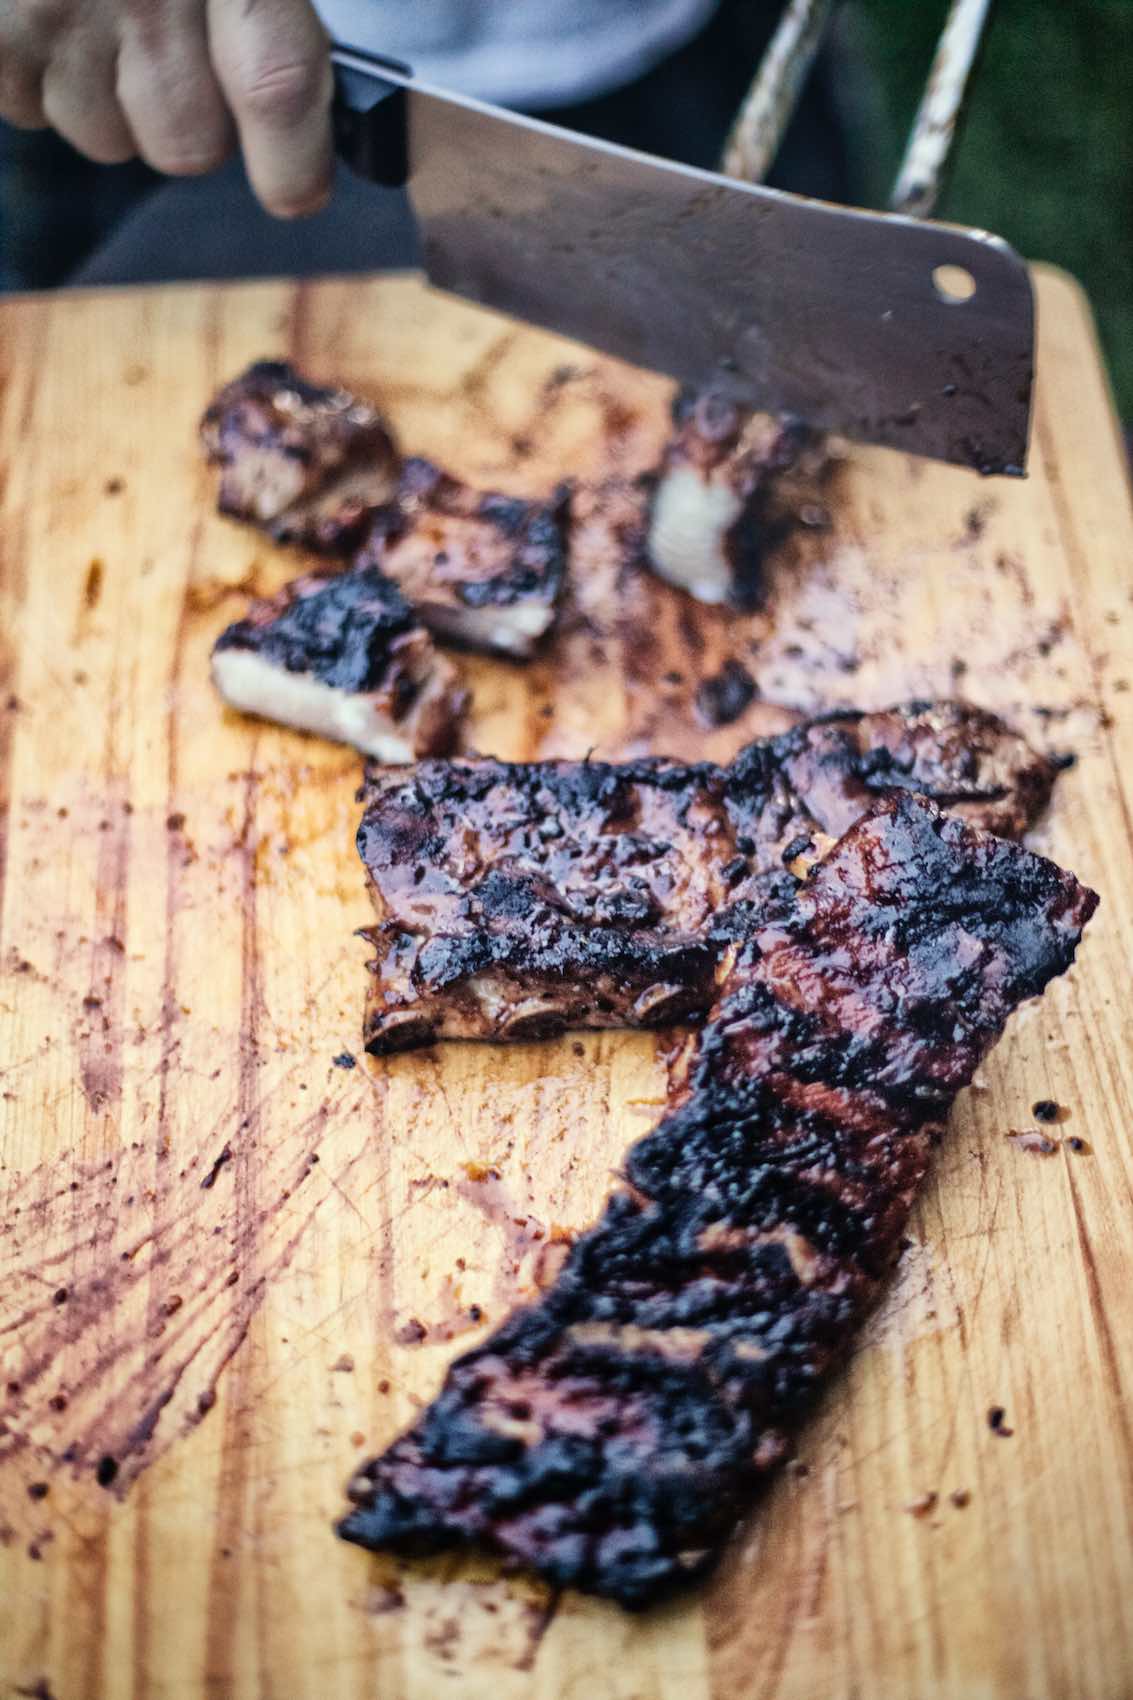 Jody Horton Photography - Barbecued ribs sliced on wood cutting board.